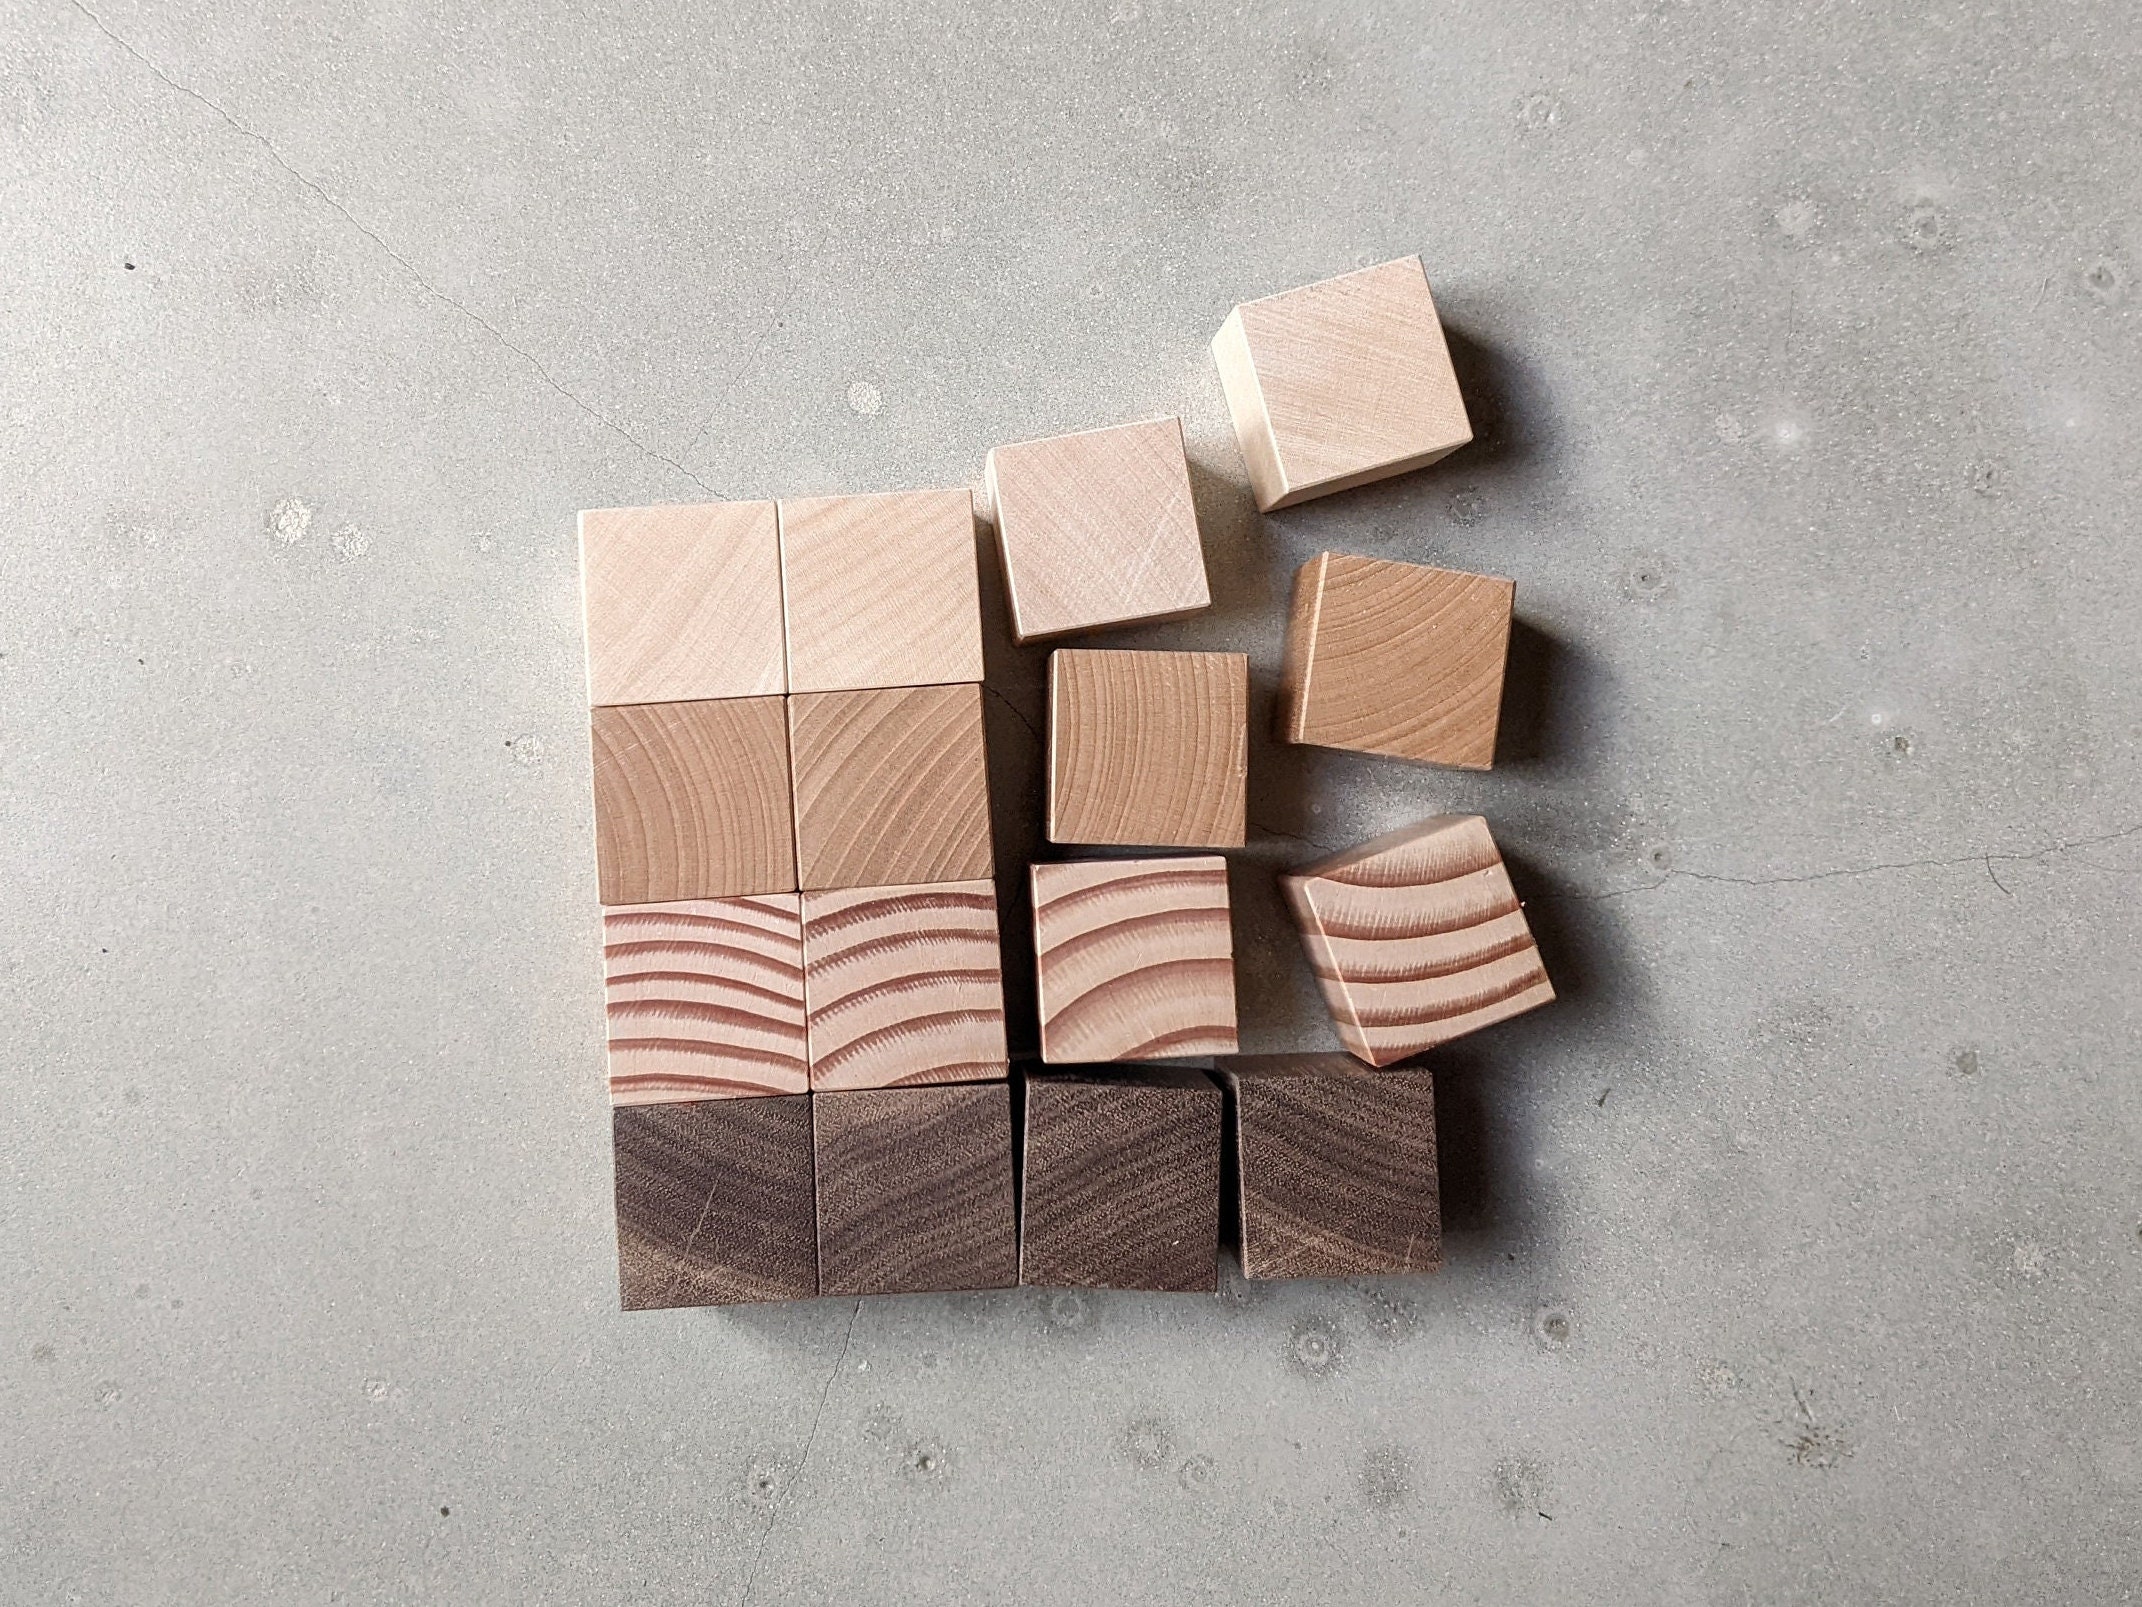 10 Wood Cubes 15mm Wooden Craft Blocks, Unfinished Natural Wood